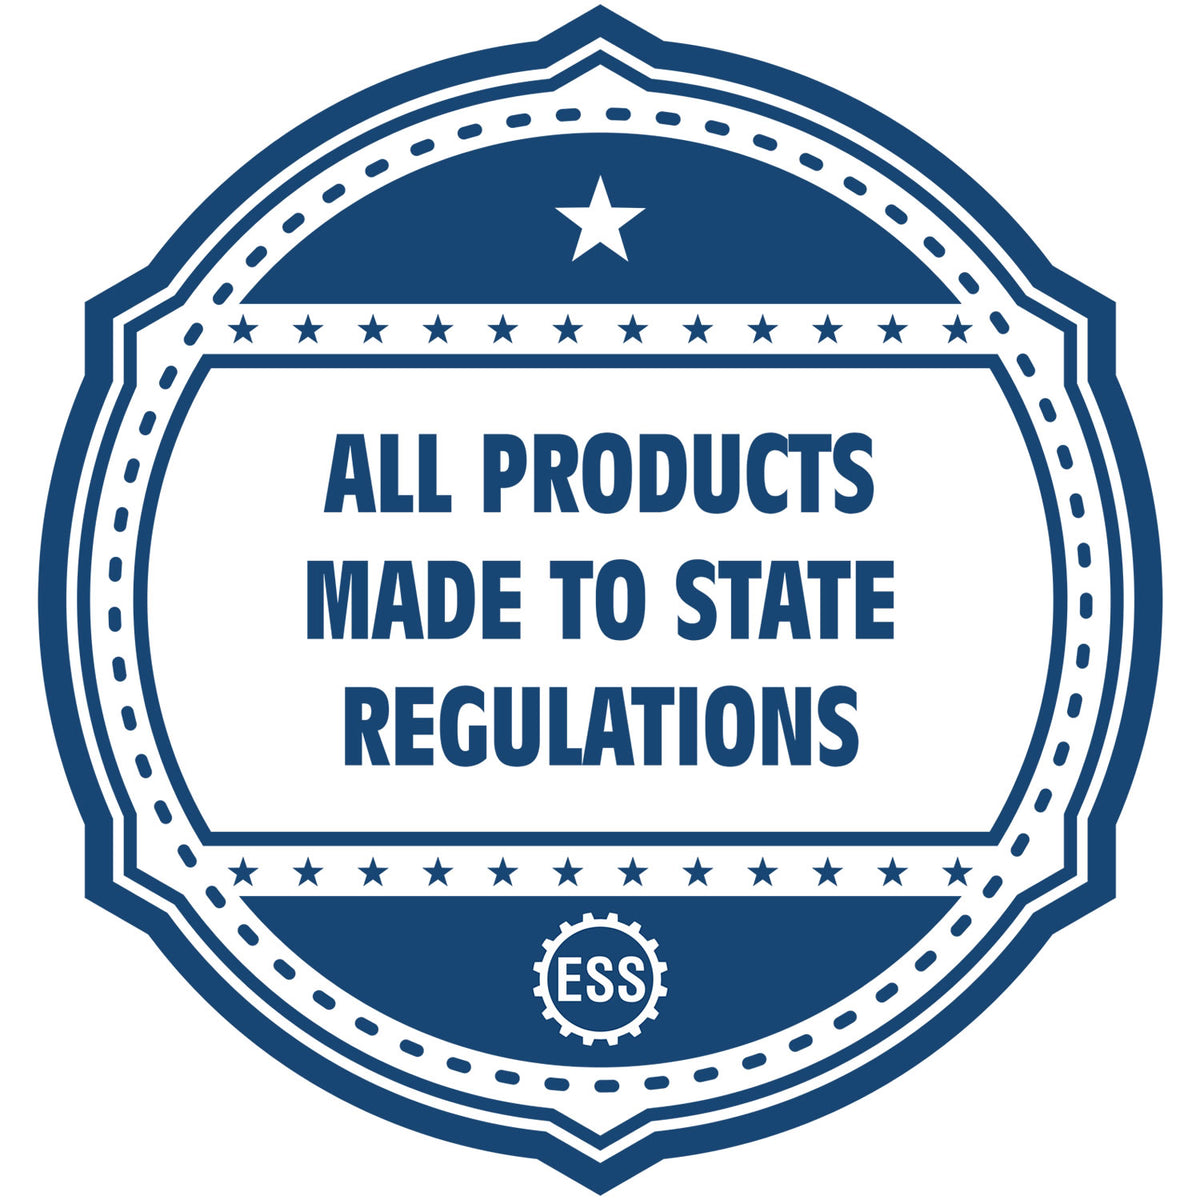 An icon or badge element for the Extended Long Reach Alaska Architect Seal Embosser showing that this product is made in compliance with state regulations.